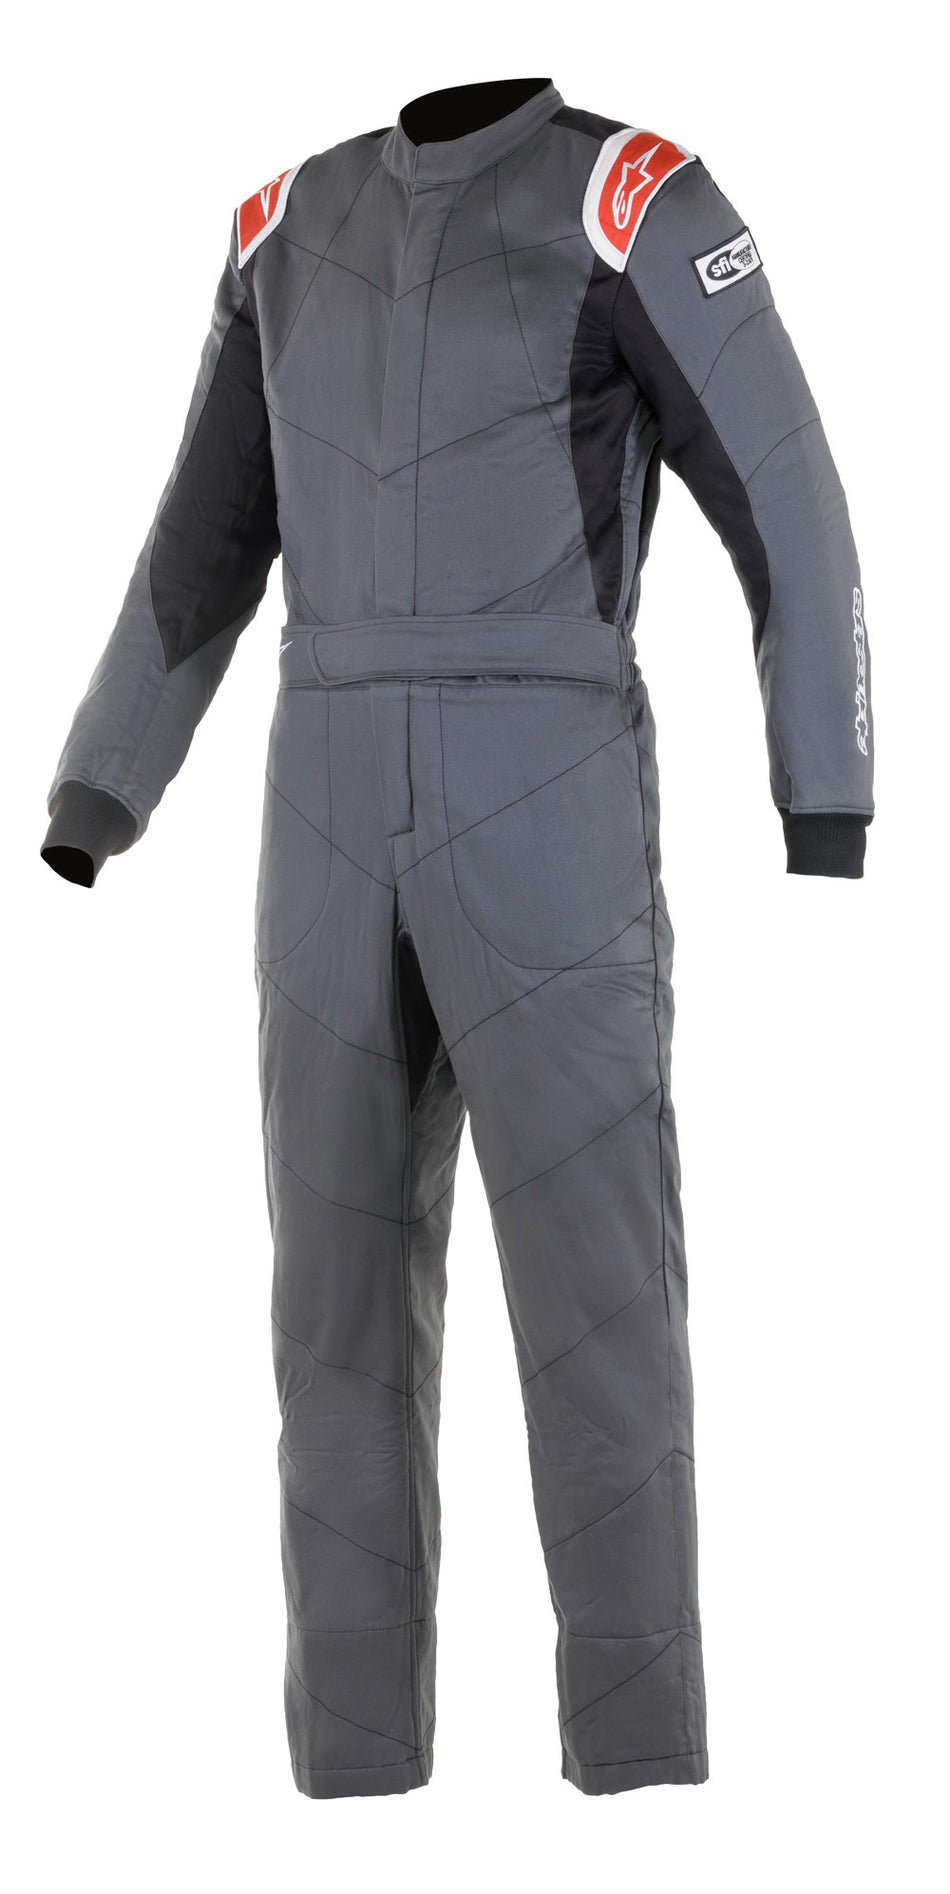 Driving Suit - Knoxville V2 - 1-Piece - SFI 3.2A/5 - Boot-Cut - Triple Layer - Fire Retardant Fabric - Gray / Red - Size 56 - Large - Each